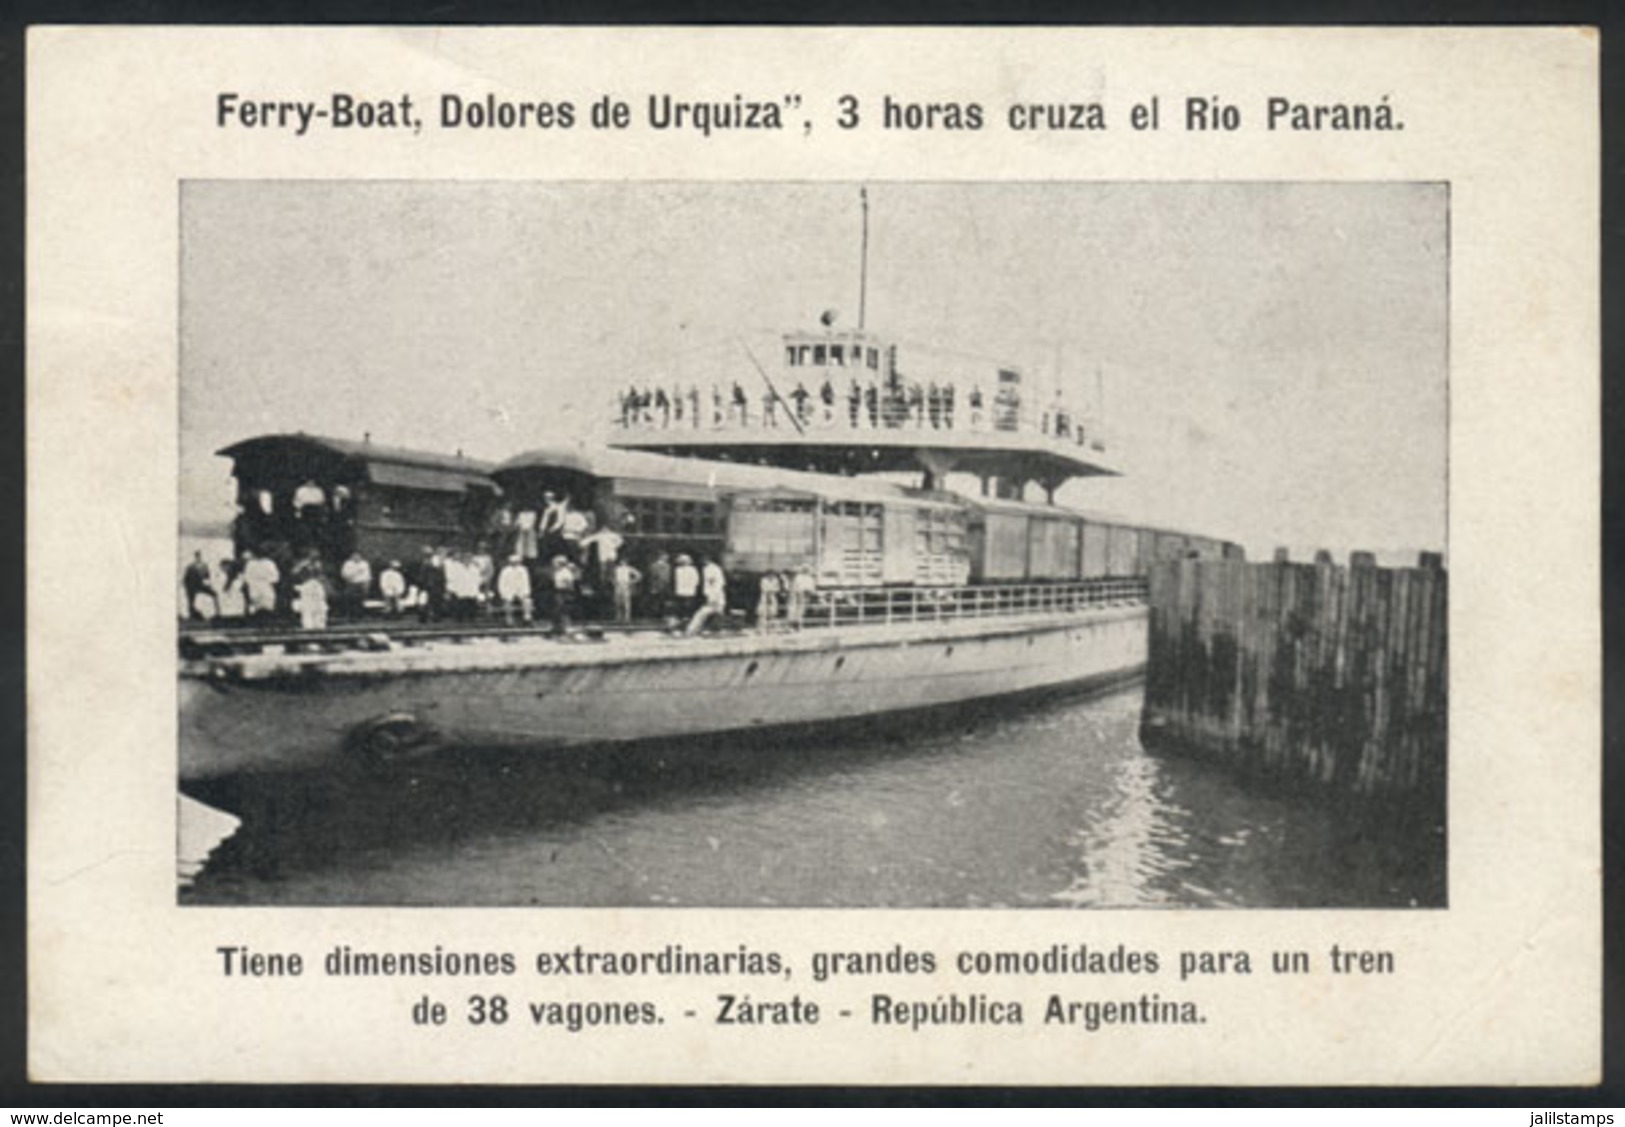 415 ARGENTINA: """FERRY-BOAT Dolores De Urquiza, Crosses The Paraná River In 3 Hours. Extraordinary Dimensions, Very Con - Argentine